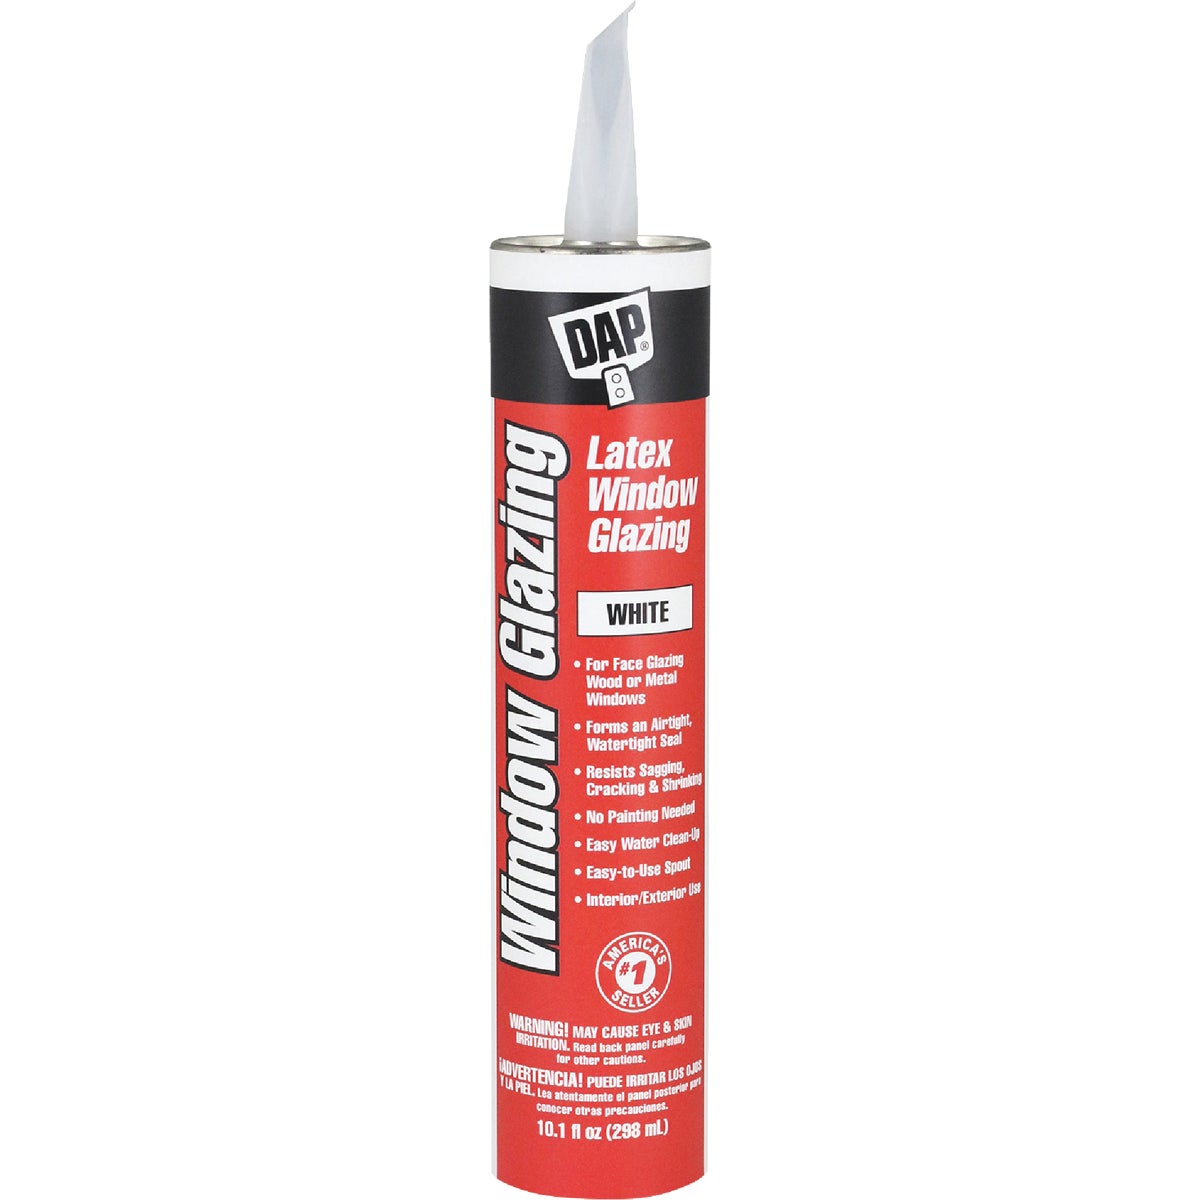 Item 770051, Provides a long lasting seal against weather and moisture.